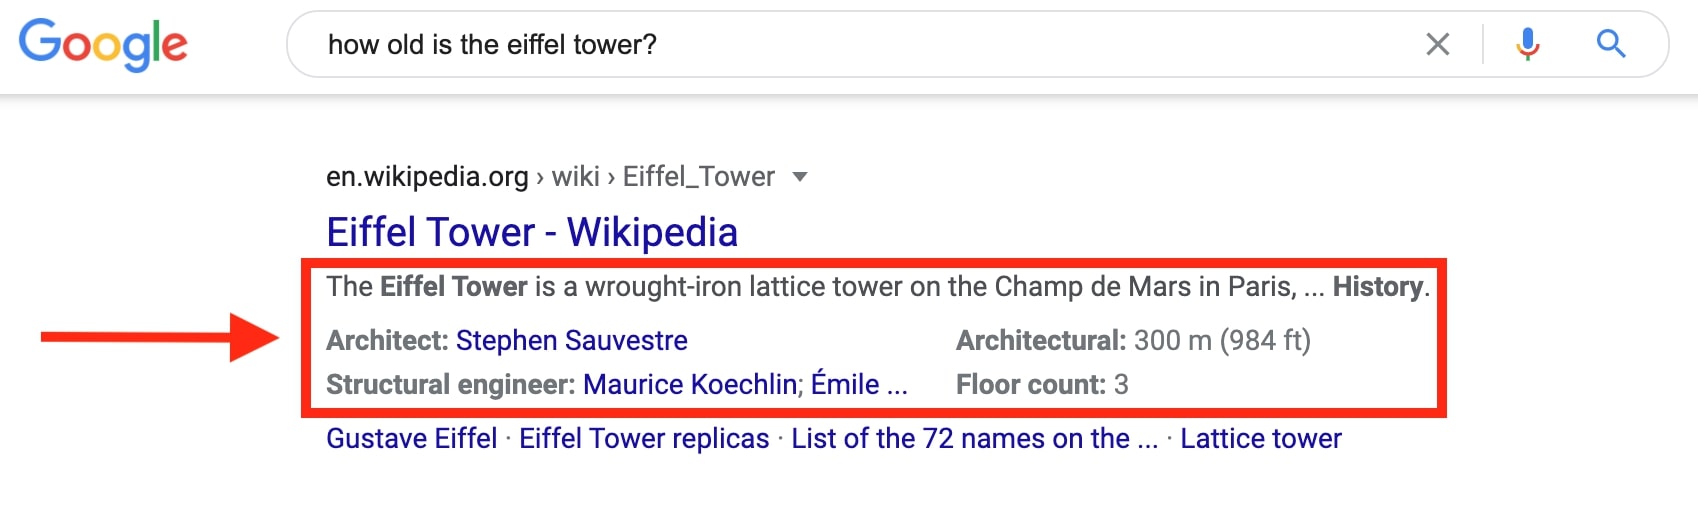 Google snippet for Eiffel Tower